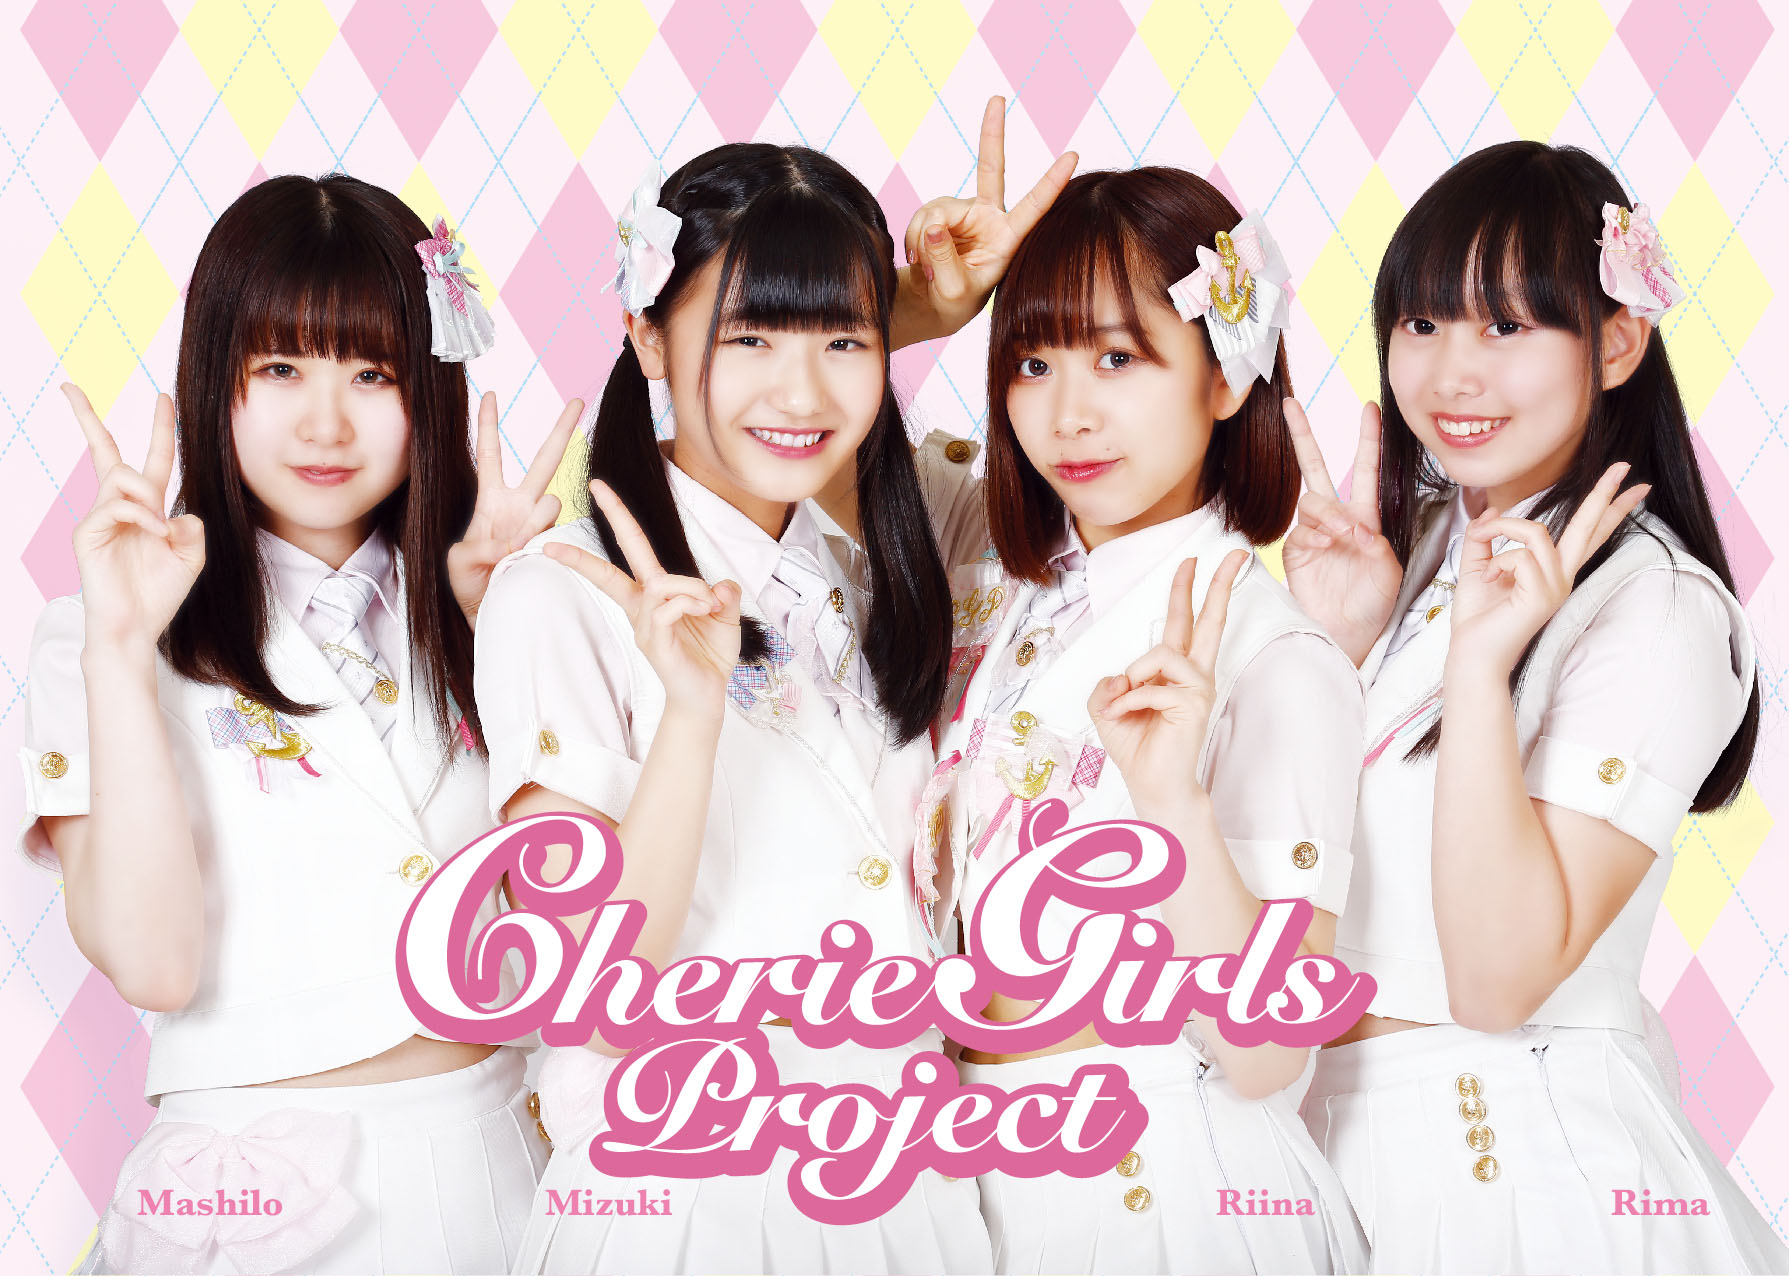 CHERIE GIRLS PROJECT